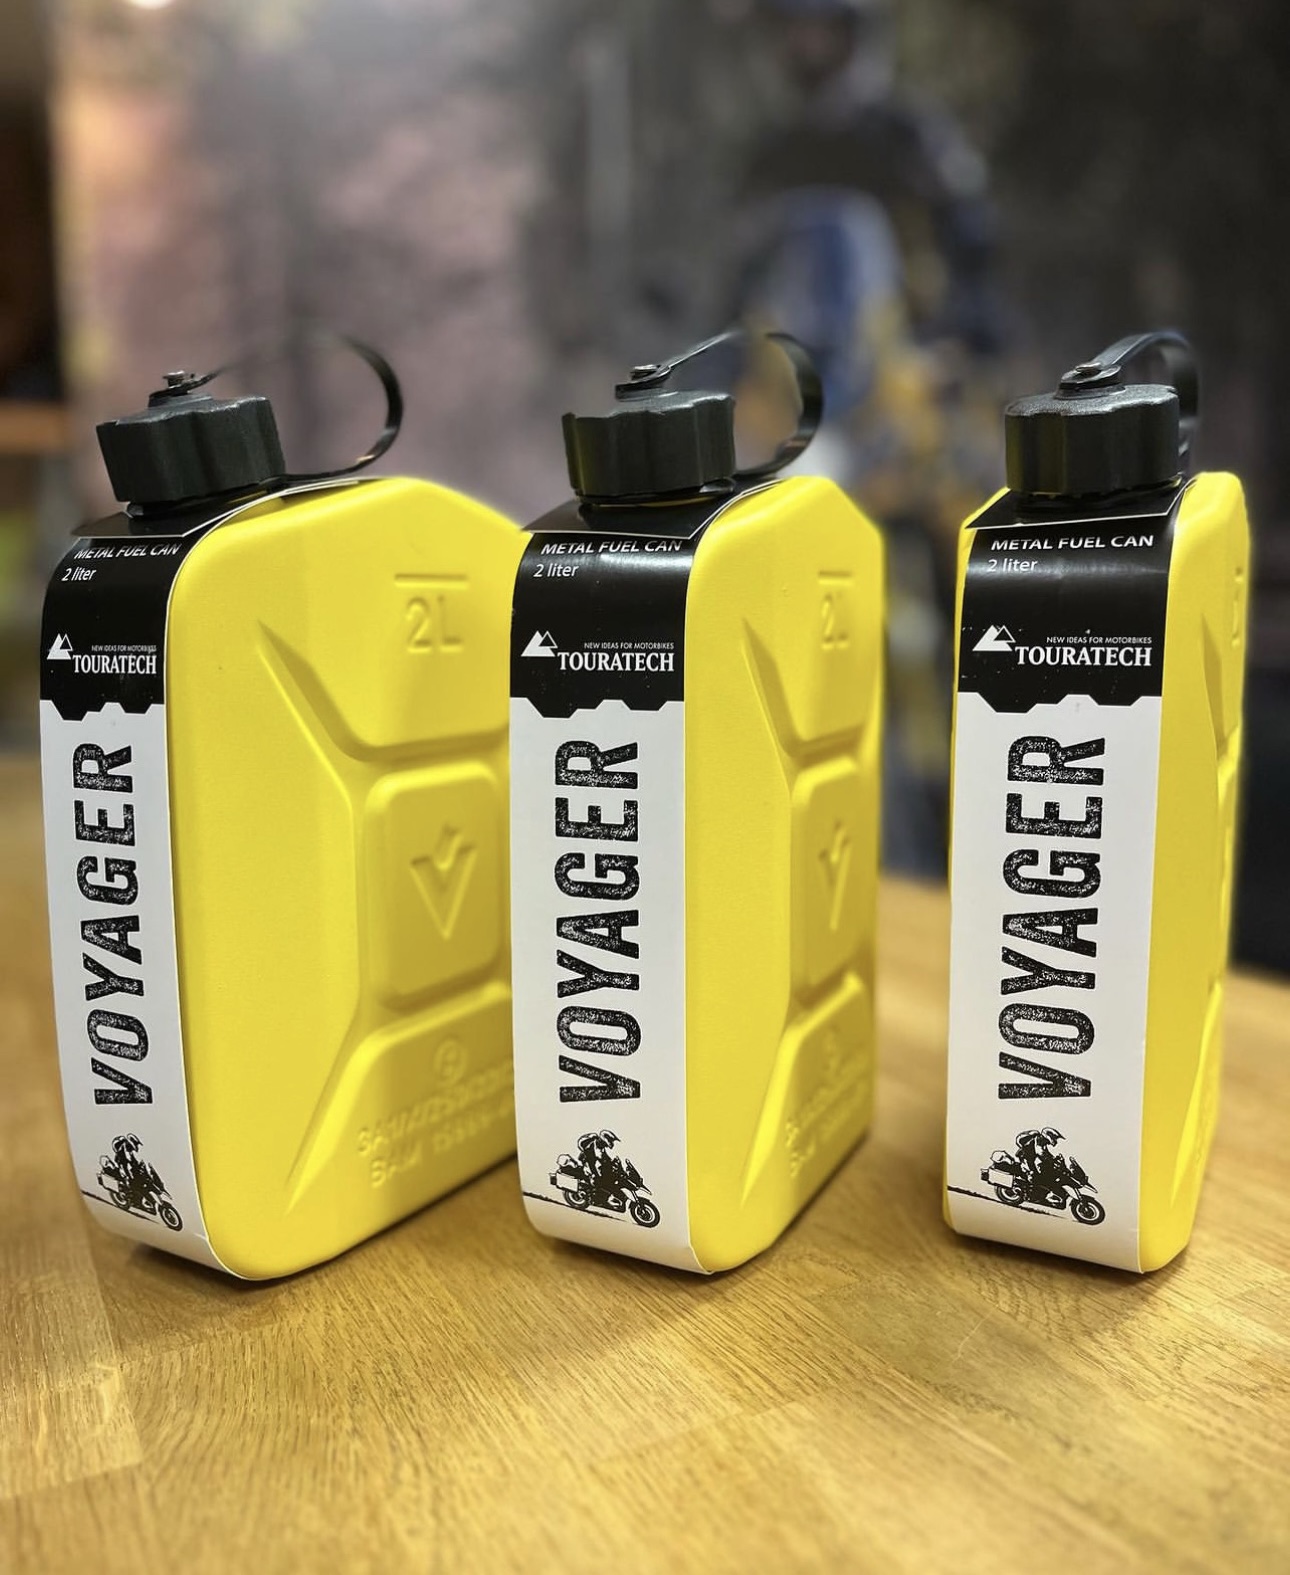 Metal fuel can Touratech "Voyager" 2 LMetal fuel can Touratech "Voyager" 2 L